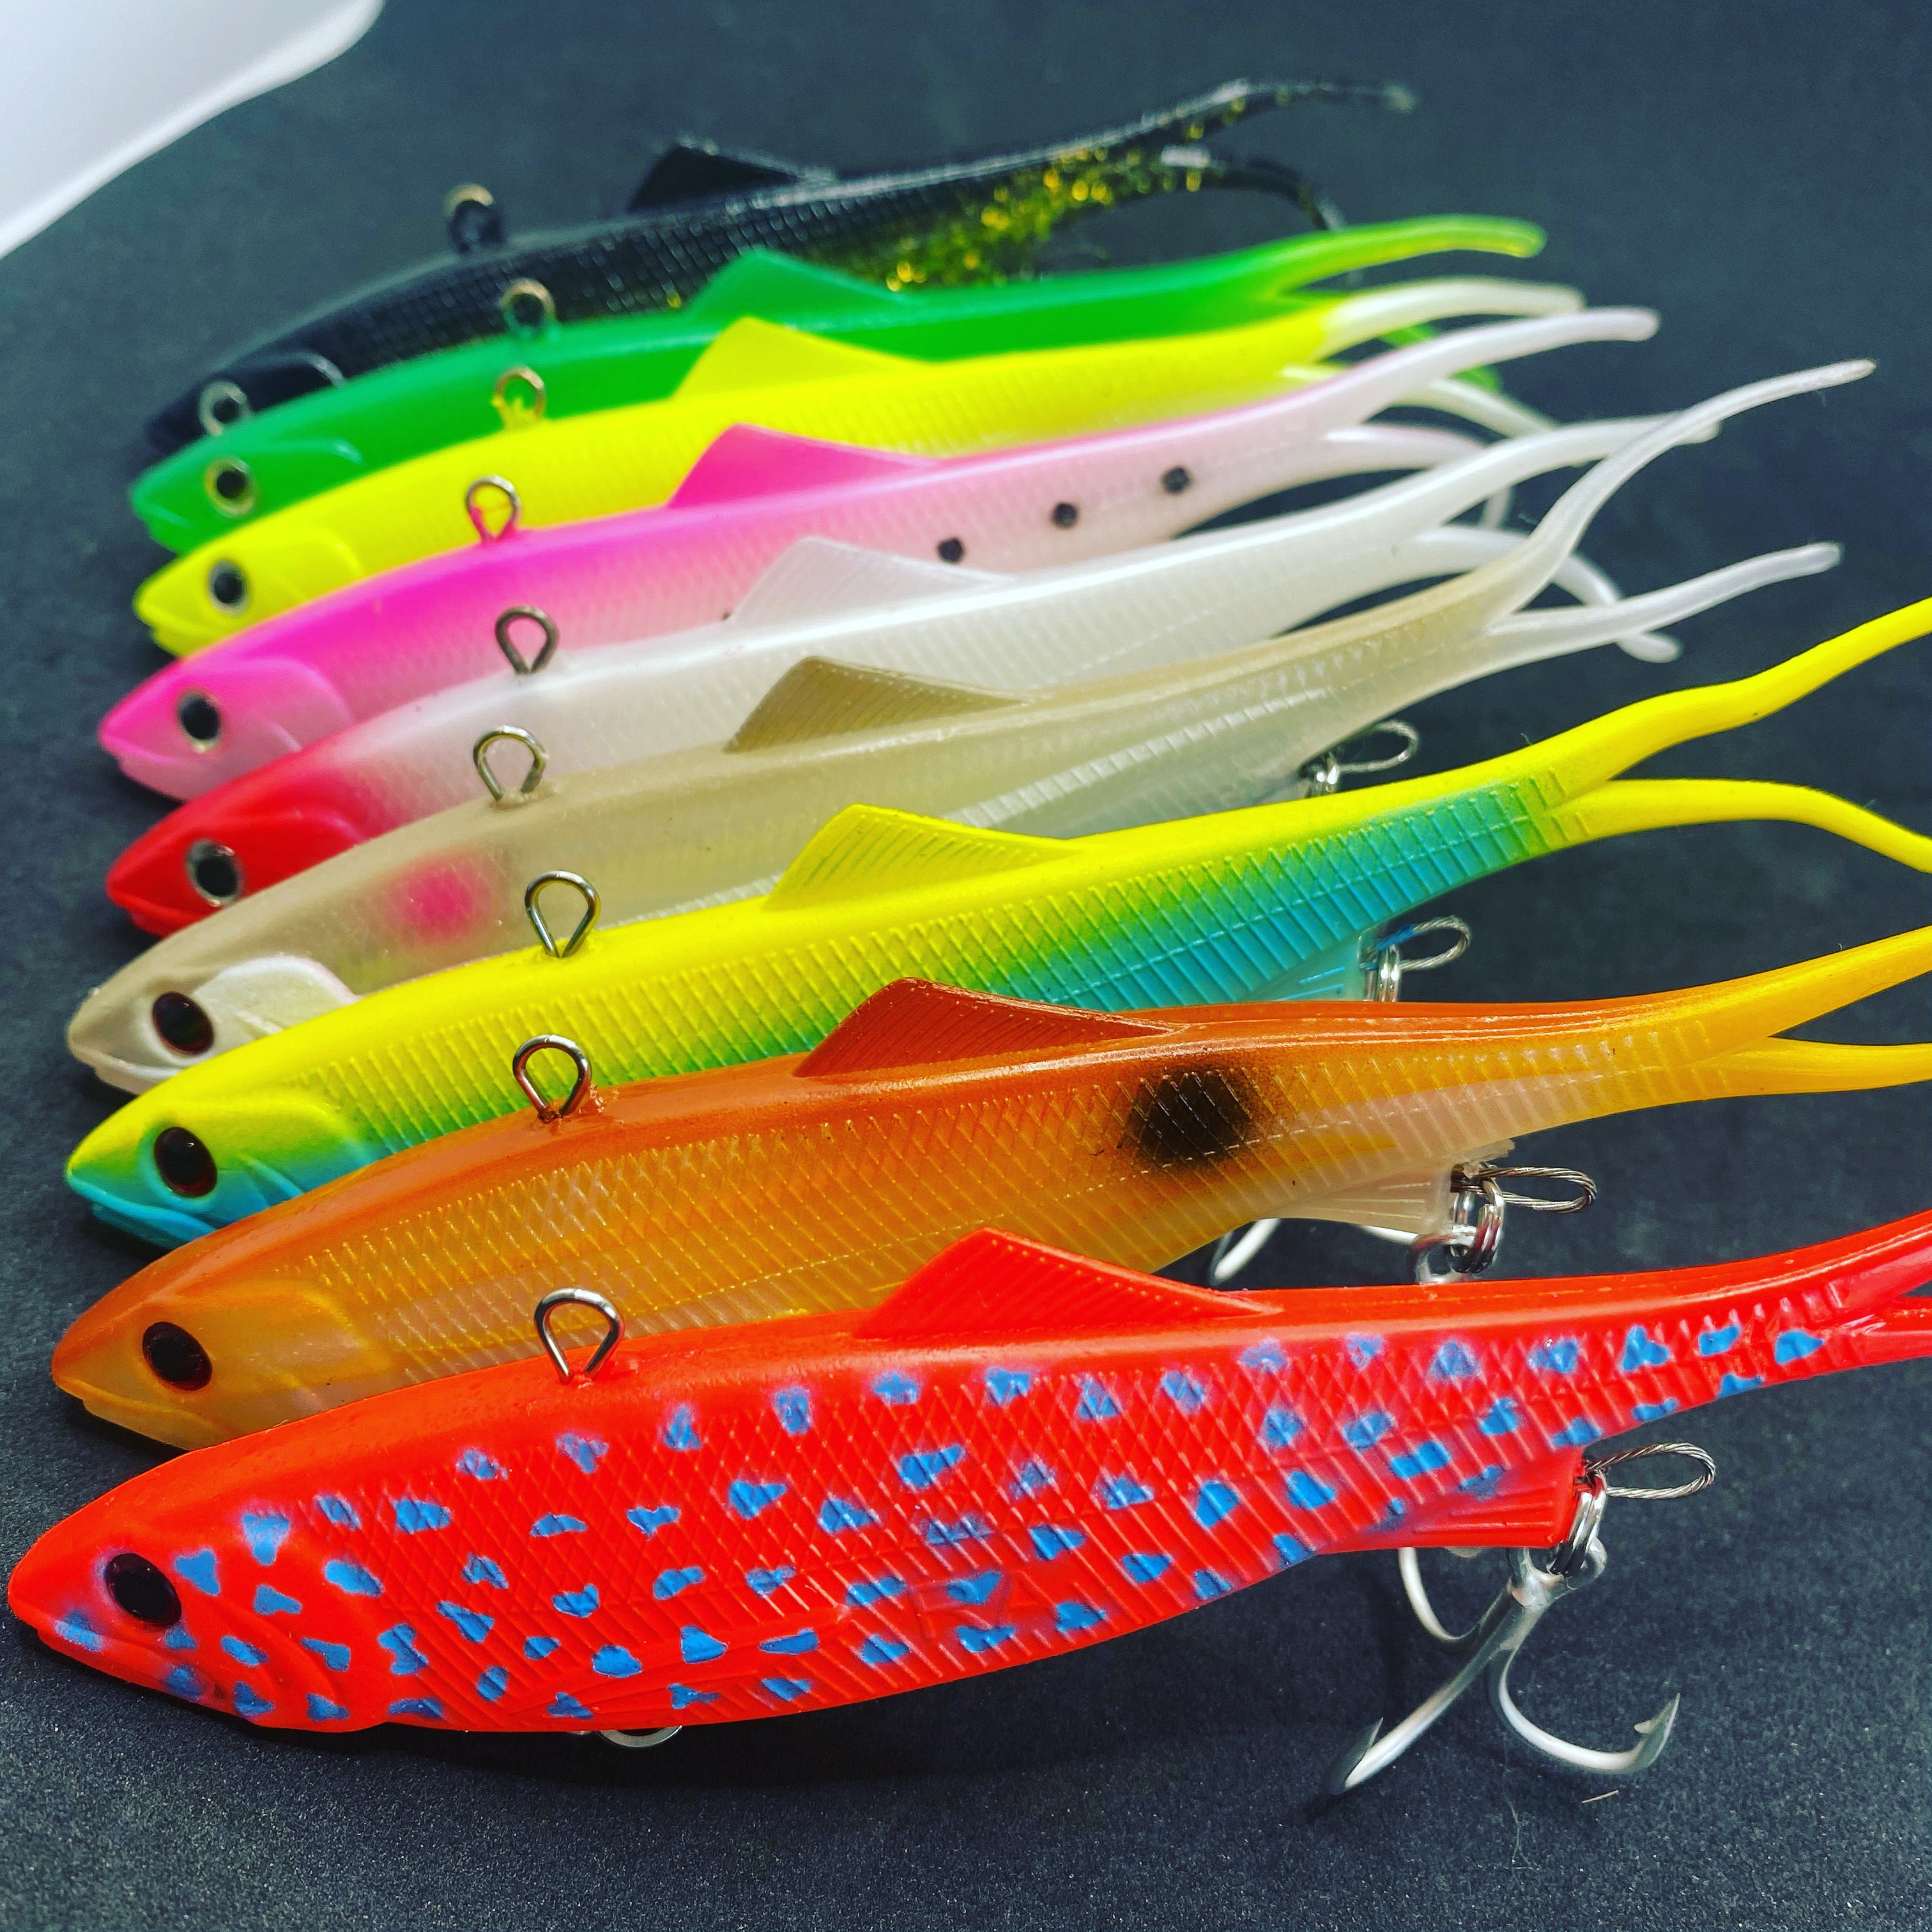 Reel Action Lures (@reelactionlures) • Instagram photos and videos